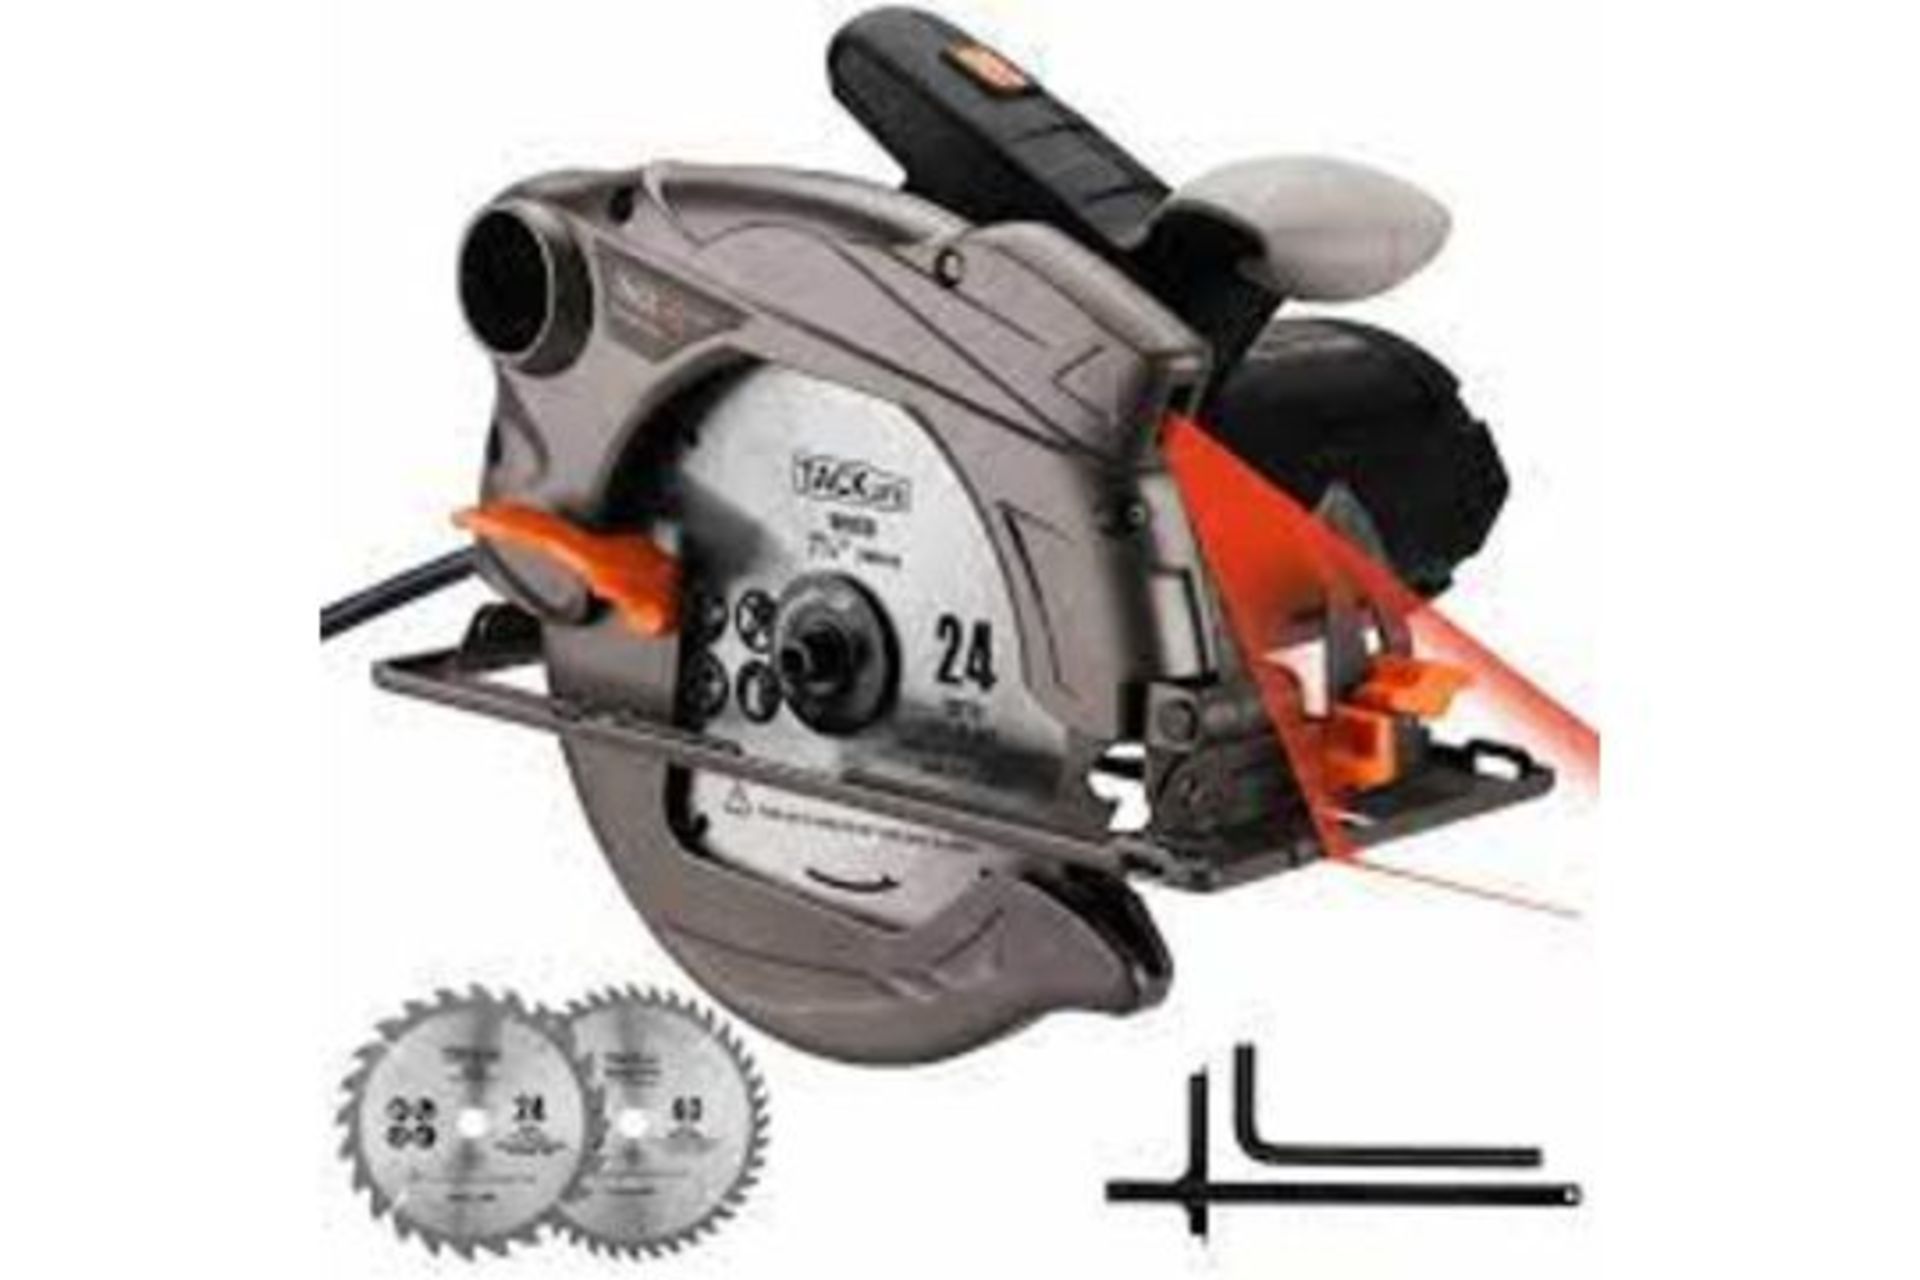 2 x Trade Lot New Boxed Tacklife Electric Circular Saw, 1500W, 5000 RPM With Bevel Cuts 2-3/5'